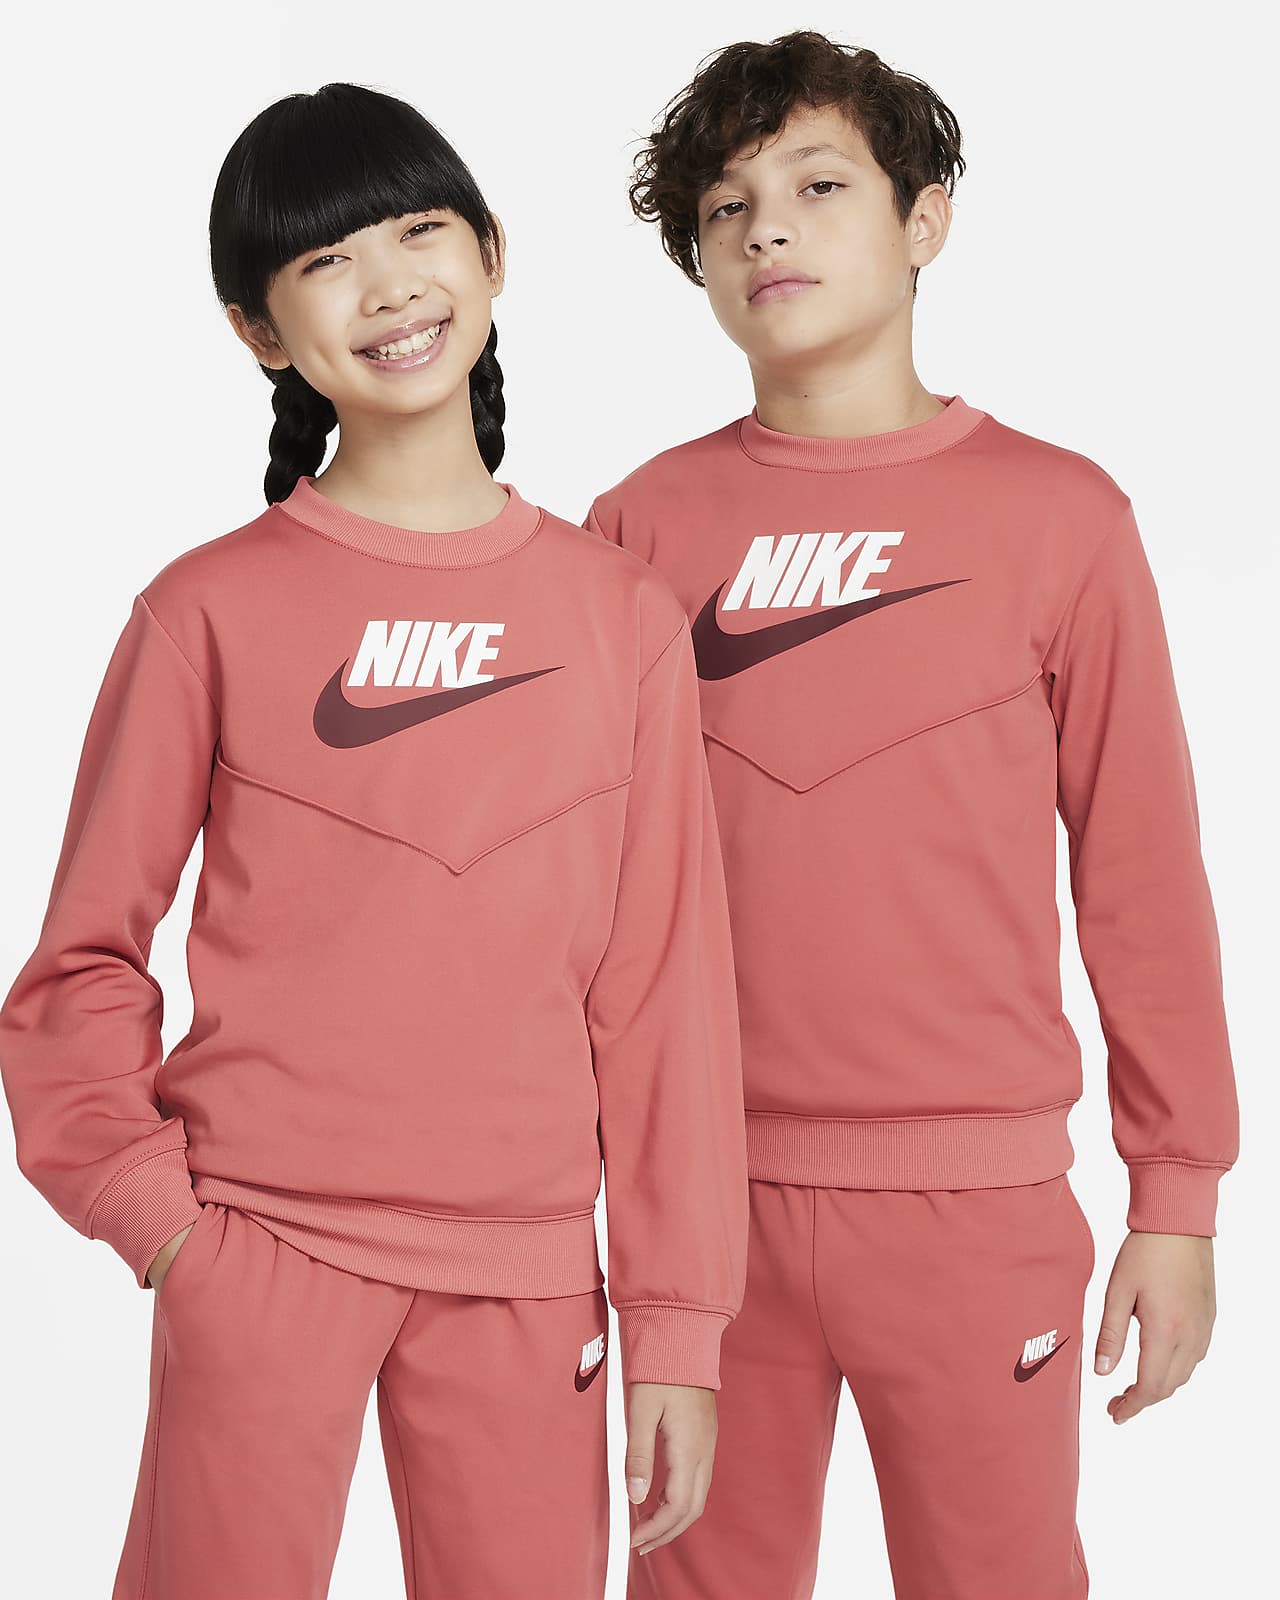 Women's Tracksuits. Nike IN